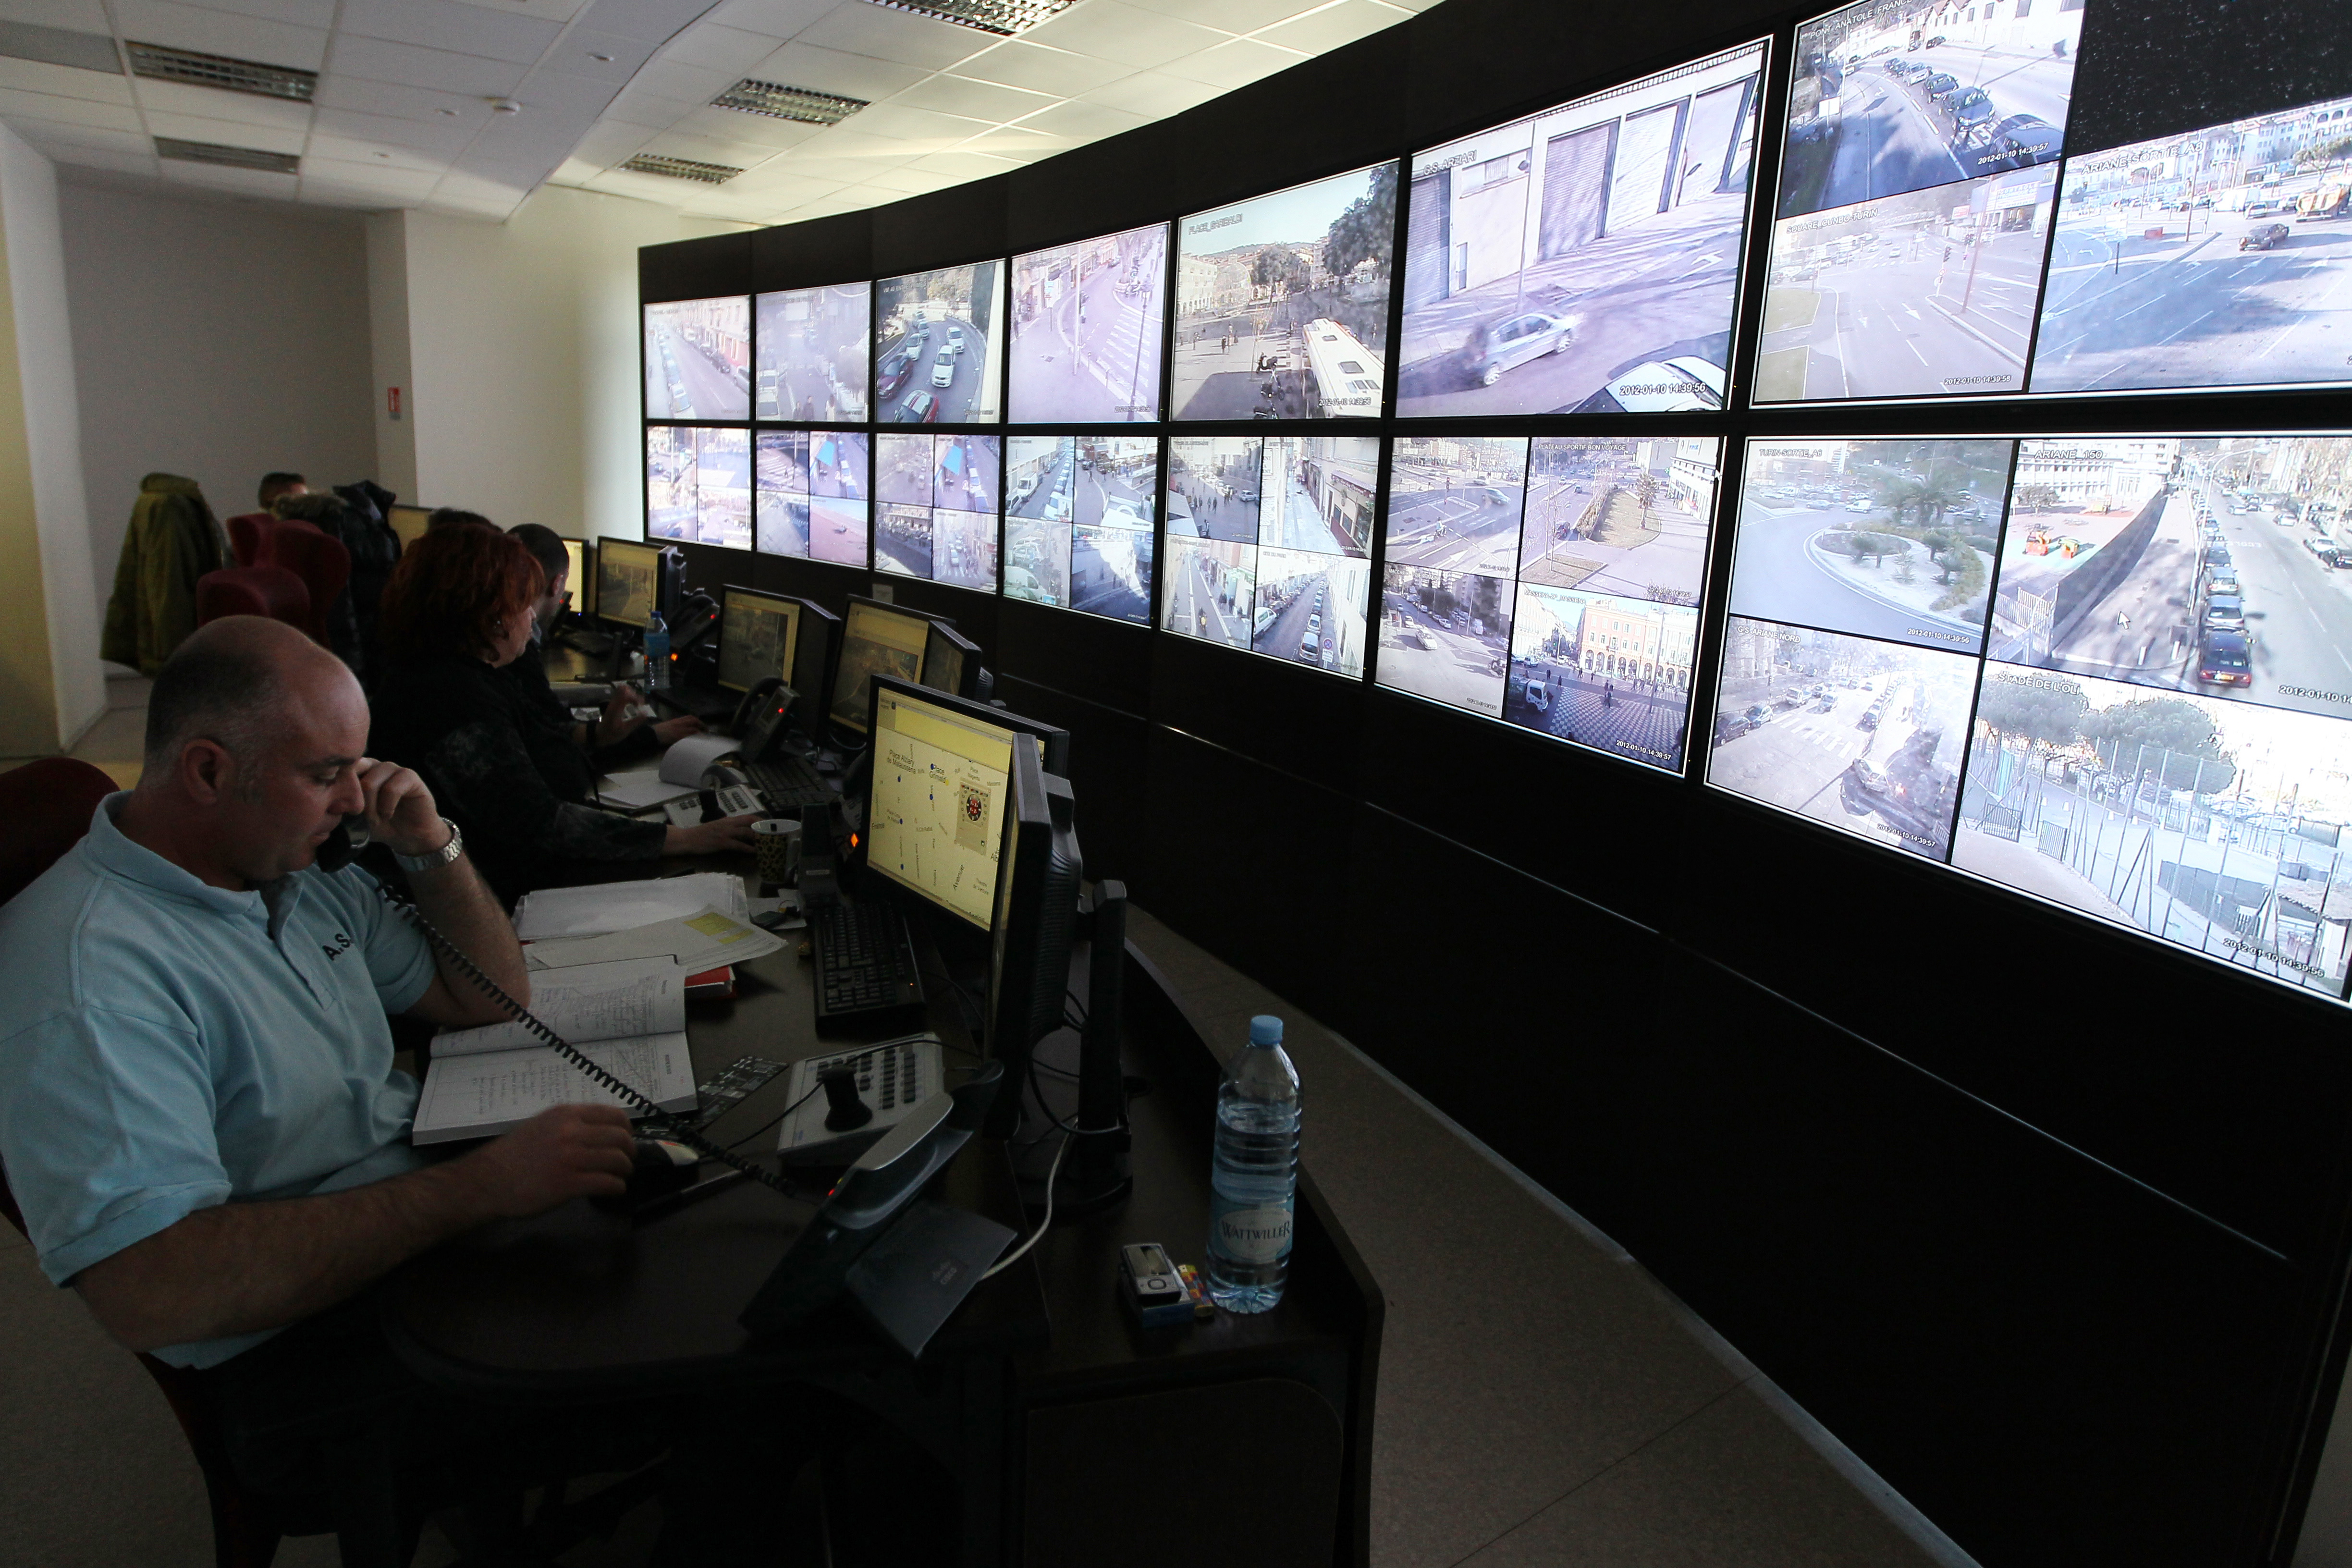 Policemen control on a giant screen videos taken from surveillance cameras in the streets of Nice, southeastern France, on January 10, 2012 at city police station. AFP PHOTO VALERY HACHE (Photo credit should read VALERY HACHE/AFP via Getty Images)